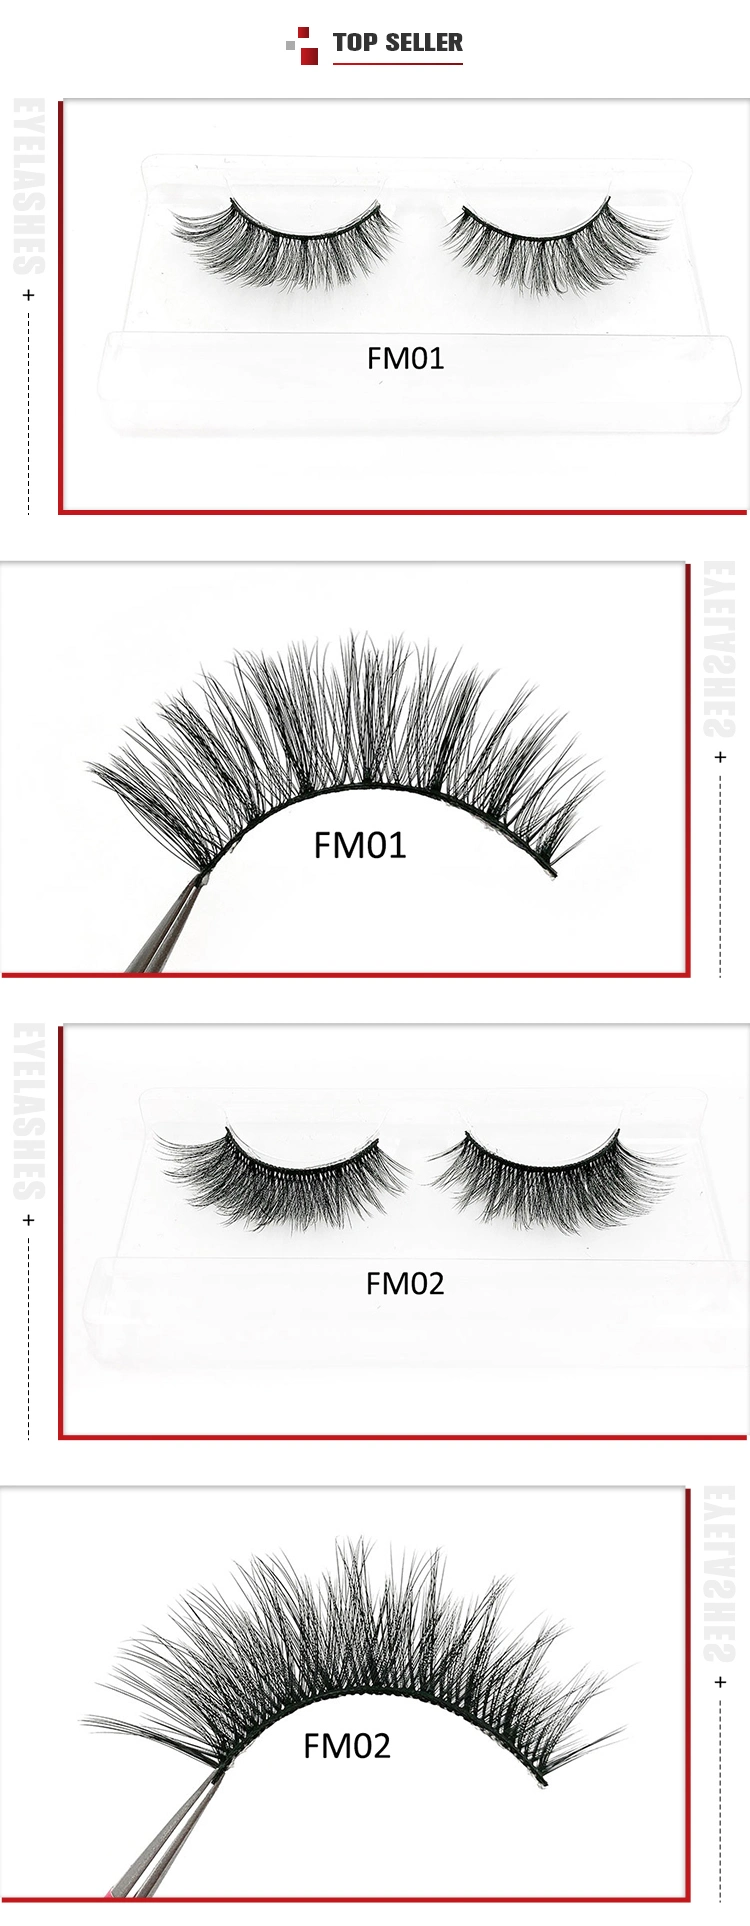 Private Label Eyelash Faux Mink Vendor 10-18mm 3D Faux Mink Eyelashes with Packing Box